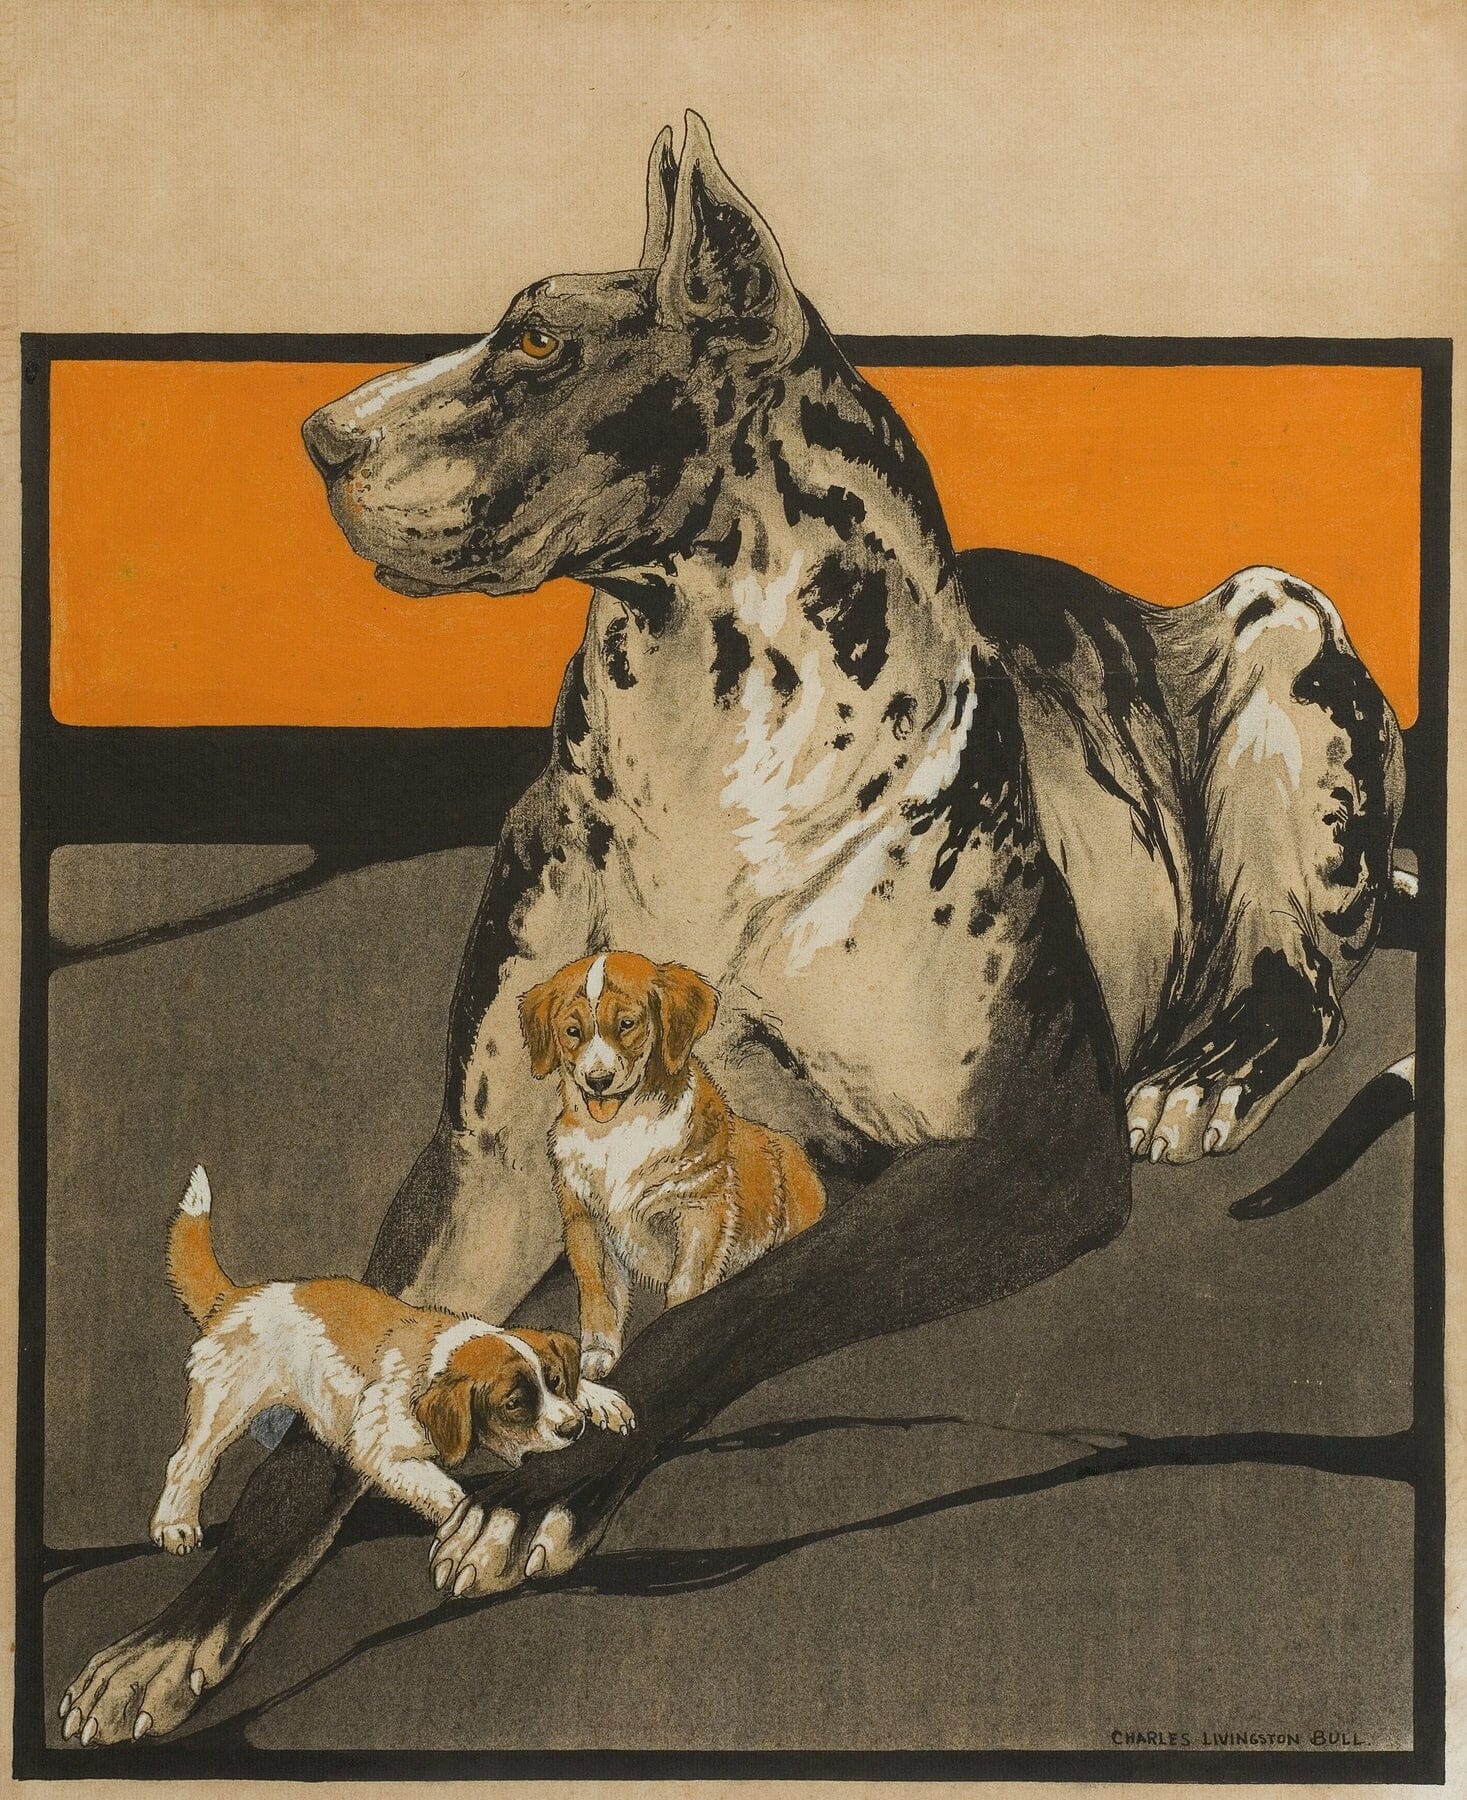 Great Dane with puppies (1920s) | Vintage dog prints |  Charles Livingston Bull Posters, Prints, & Visual Artwork The Trumpet Shop   